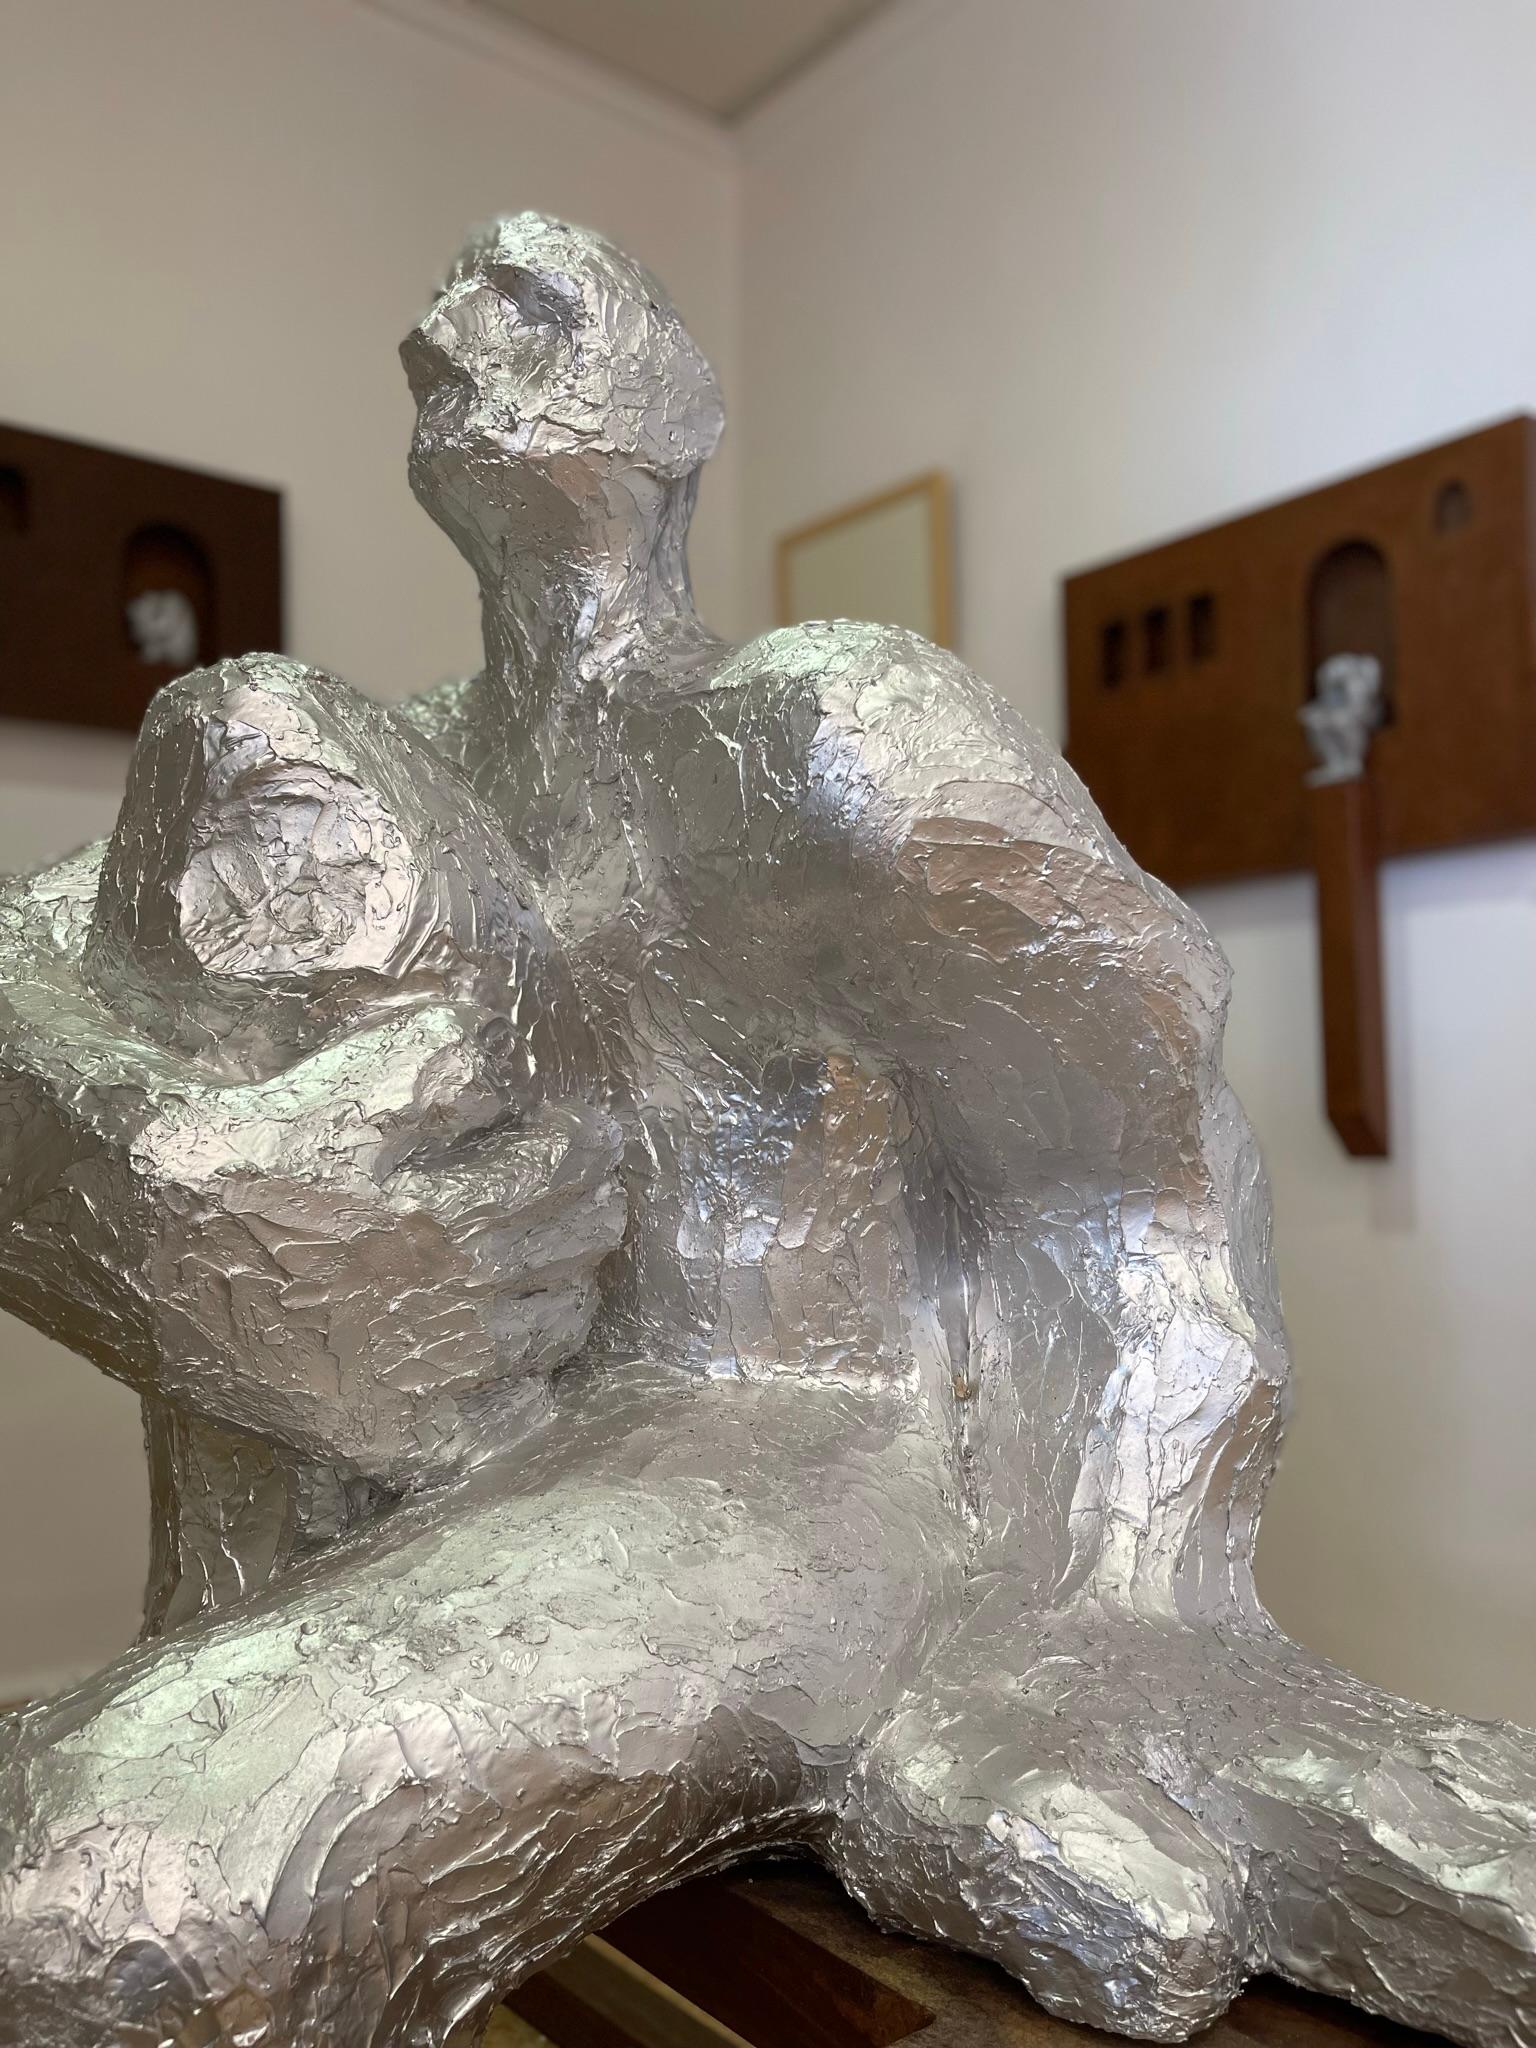 Fent Front Assegut

Here some fragments for one of his latest exhibition catalogue 
“I think that a work of art should puzzle viewers, make them reflect on the meaning of life” Antoni Tàpies

Moisés Gil’s sculptures can be described as philosophical